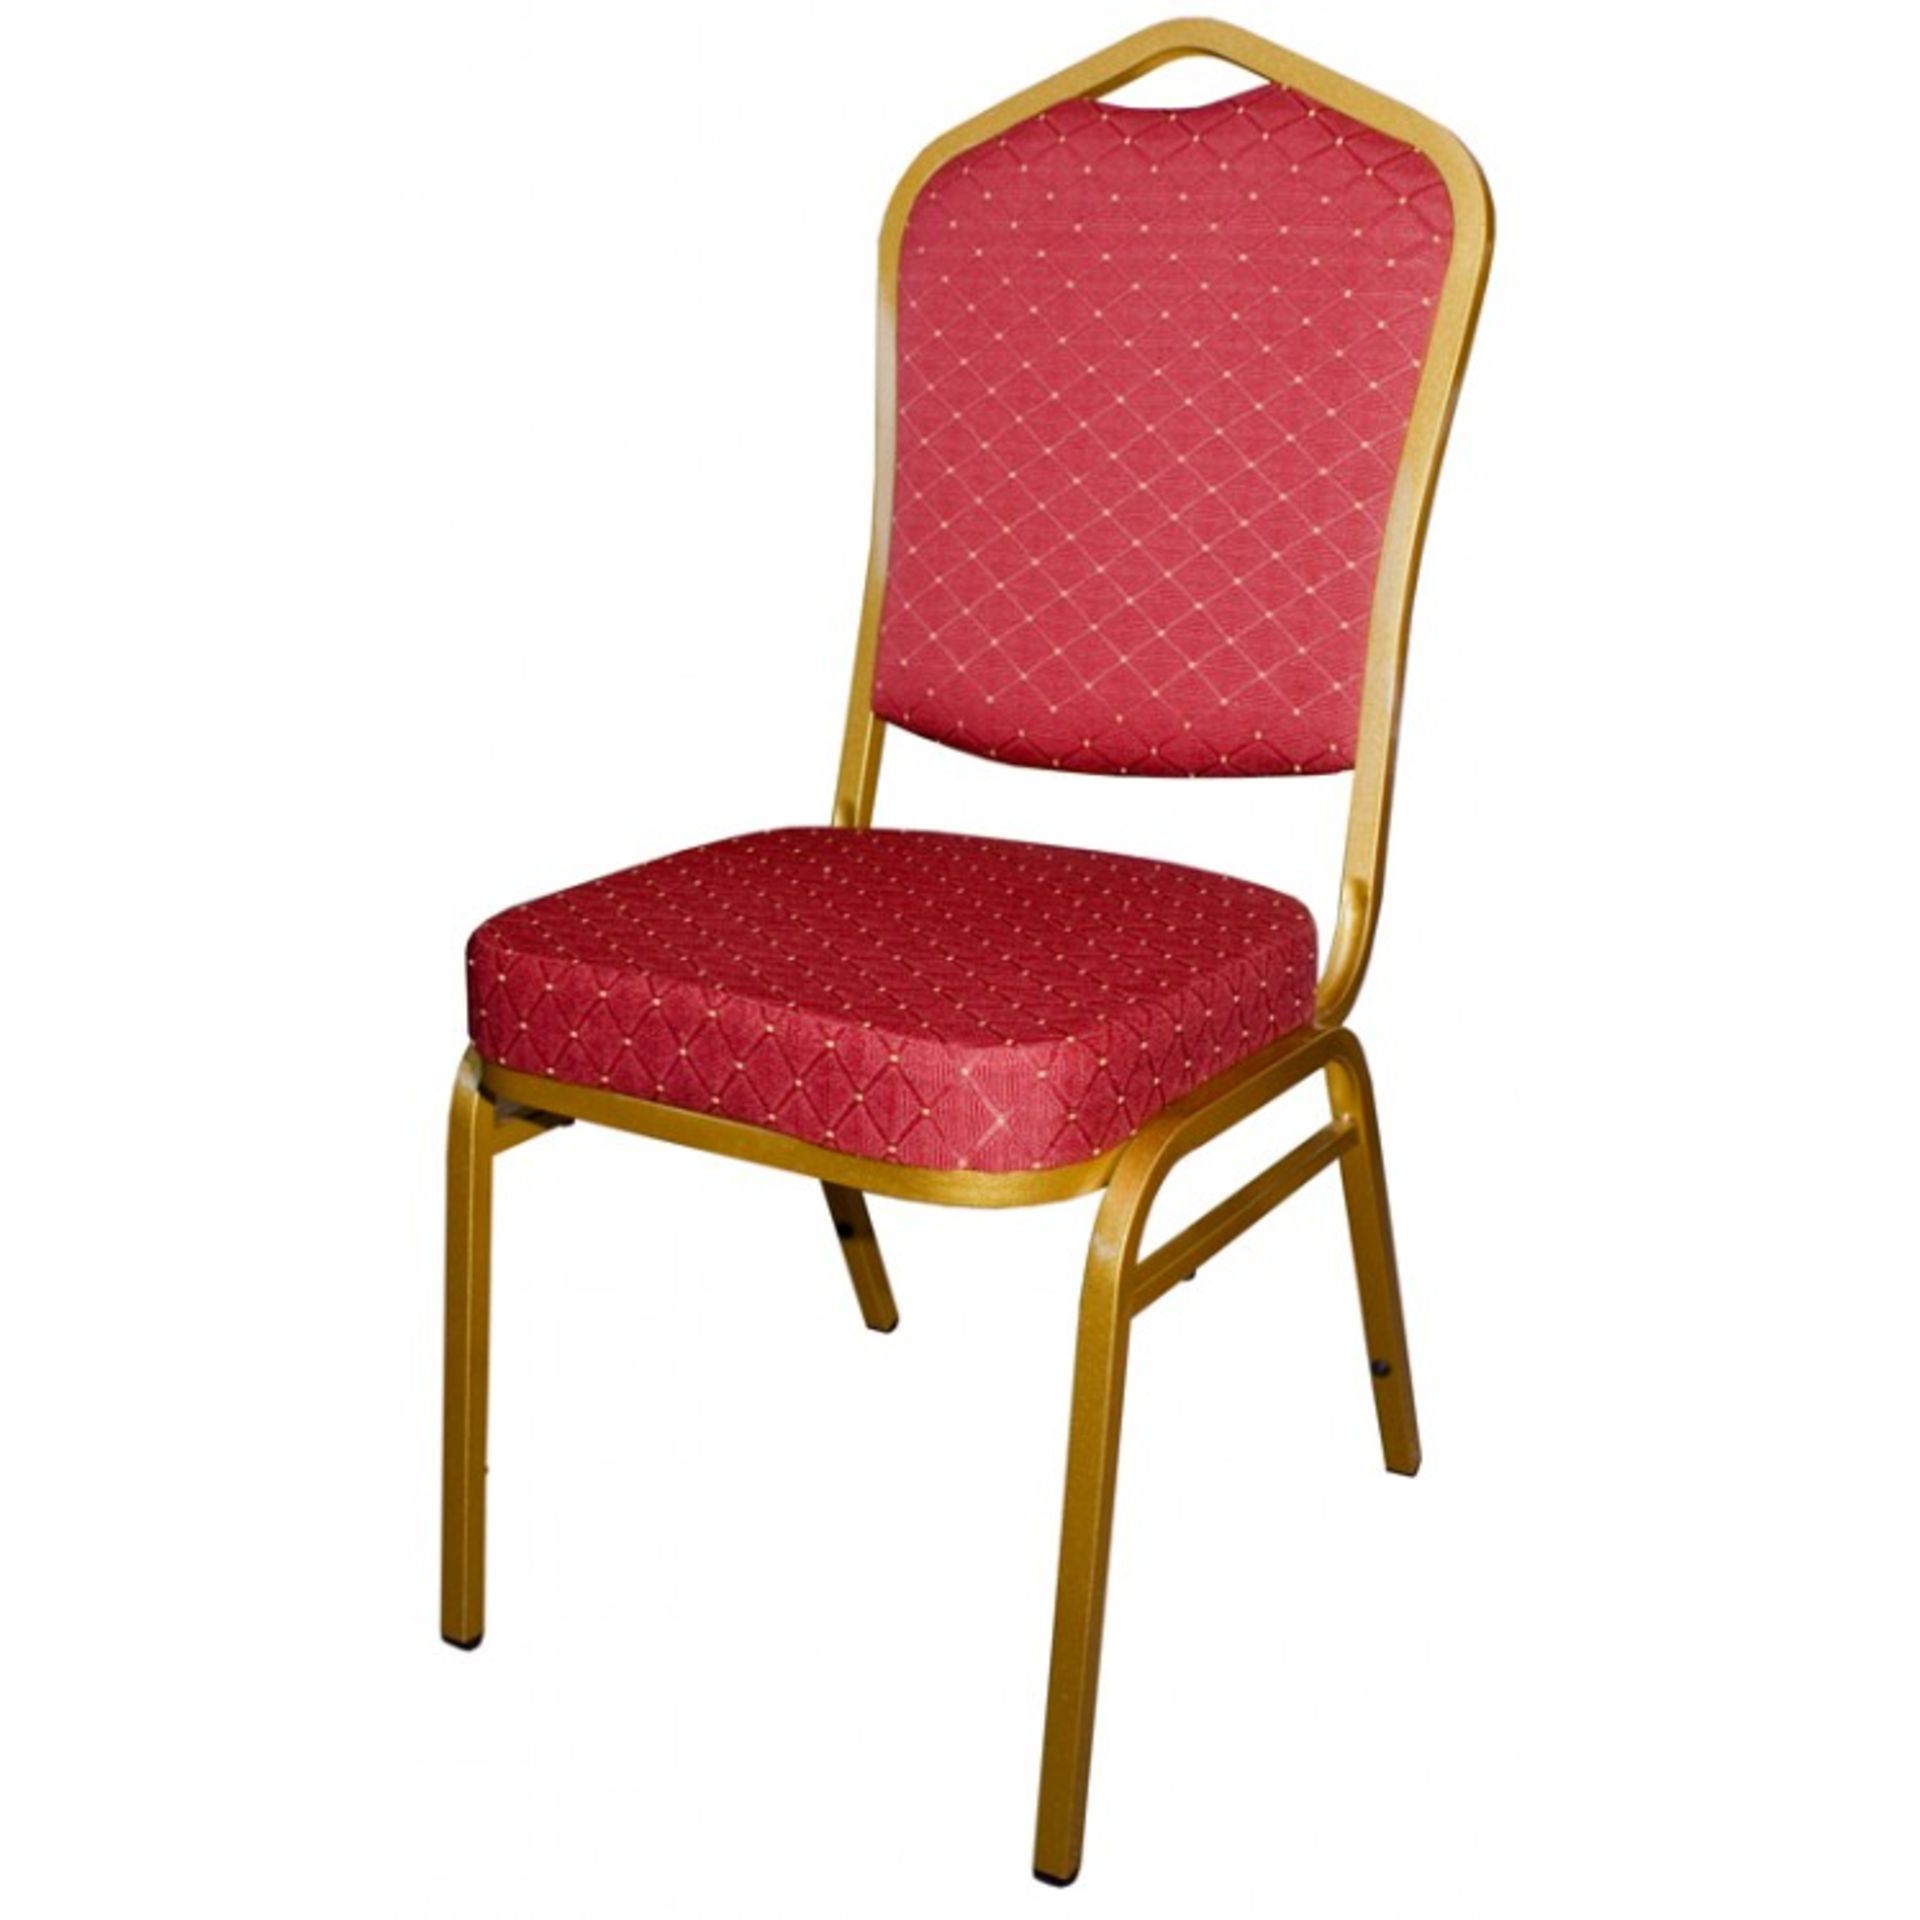 100 x Burgundy Steel Banqueting Chairs - BRAND NEW

Brand new & unused. Made with a burgundy